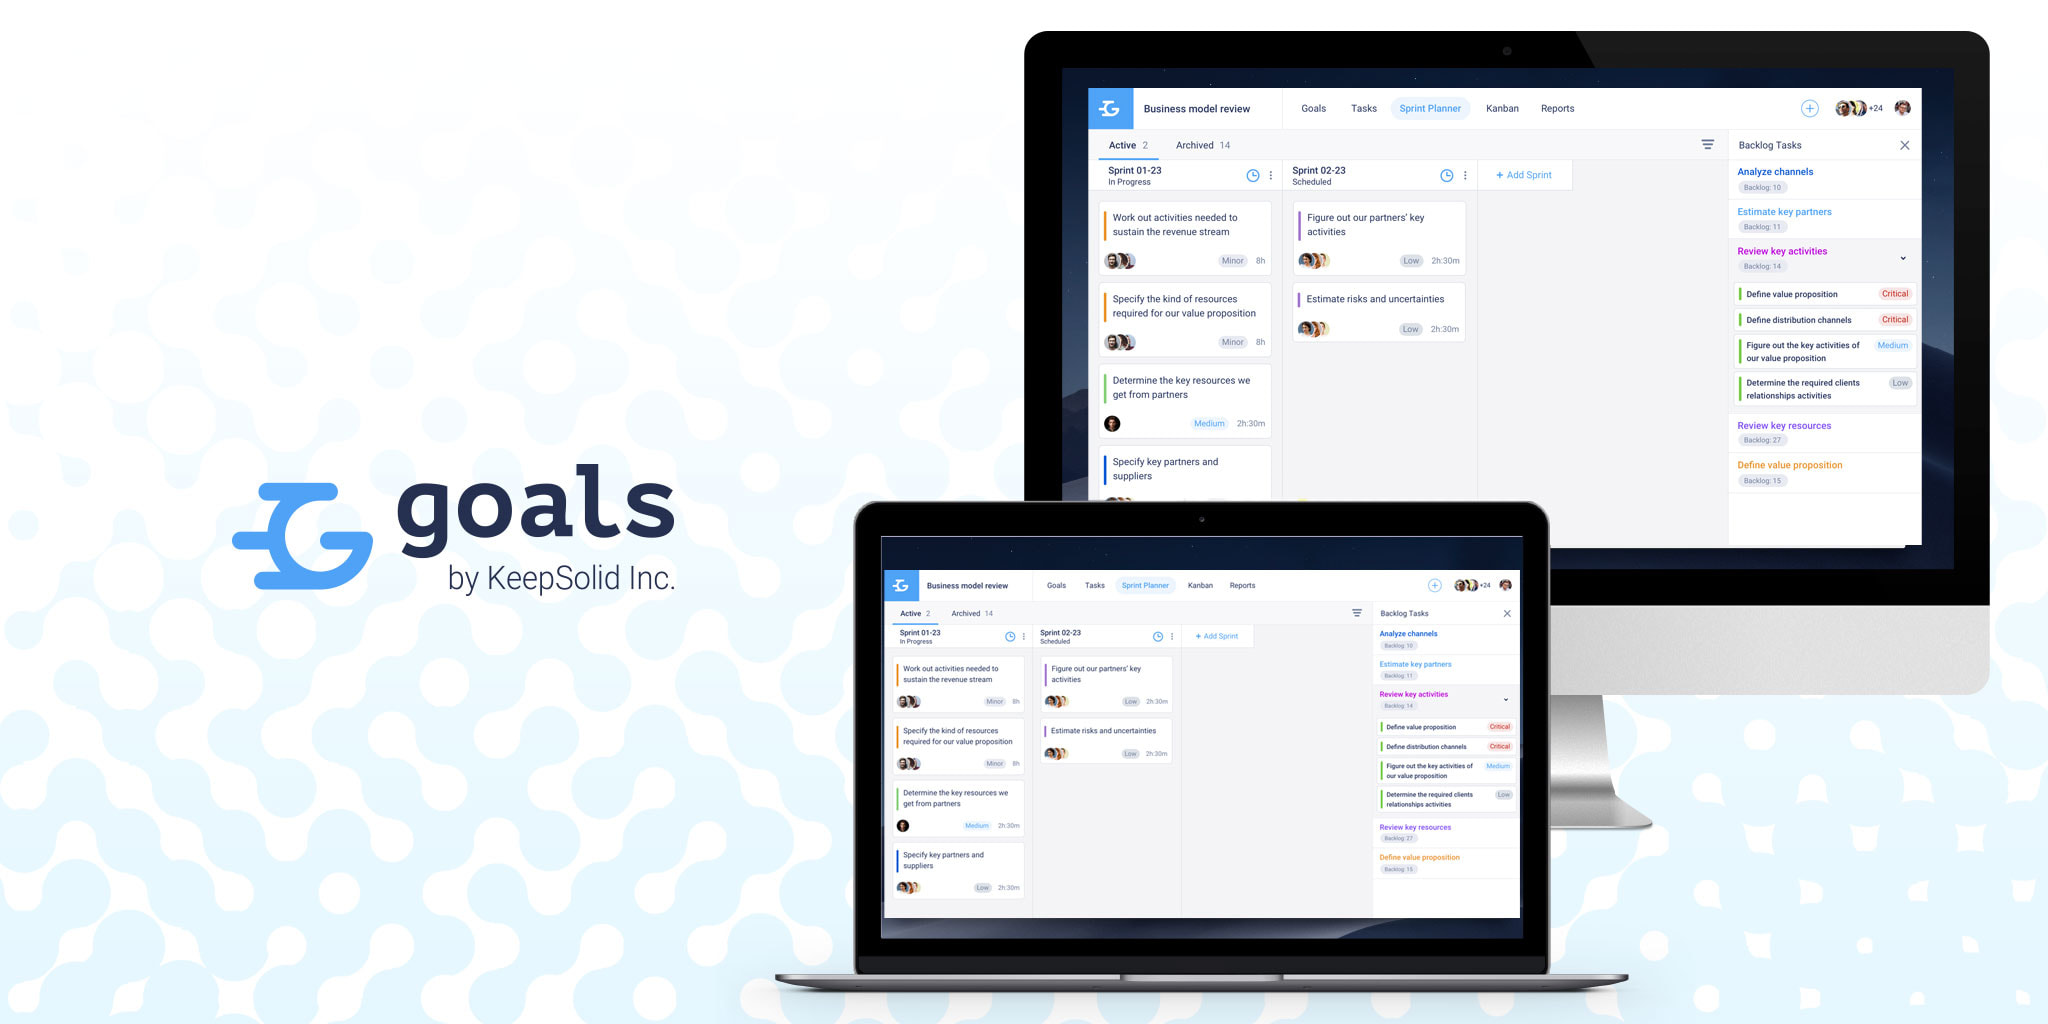  Meet goals with Goals by KeepSolid! Objective-oriented platform for project management and business